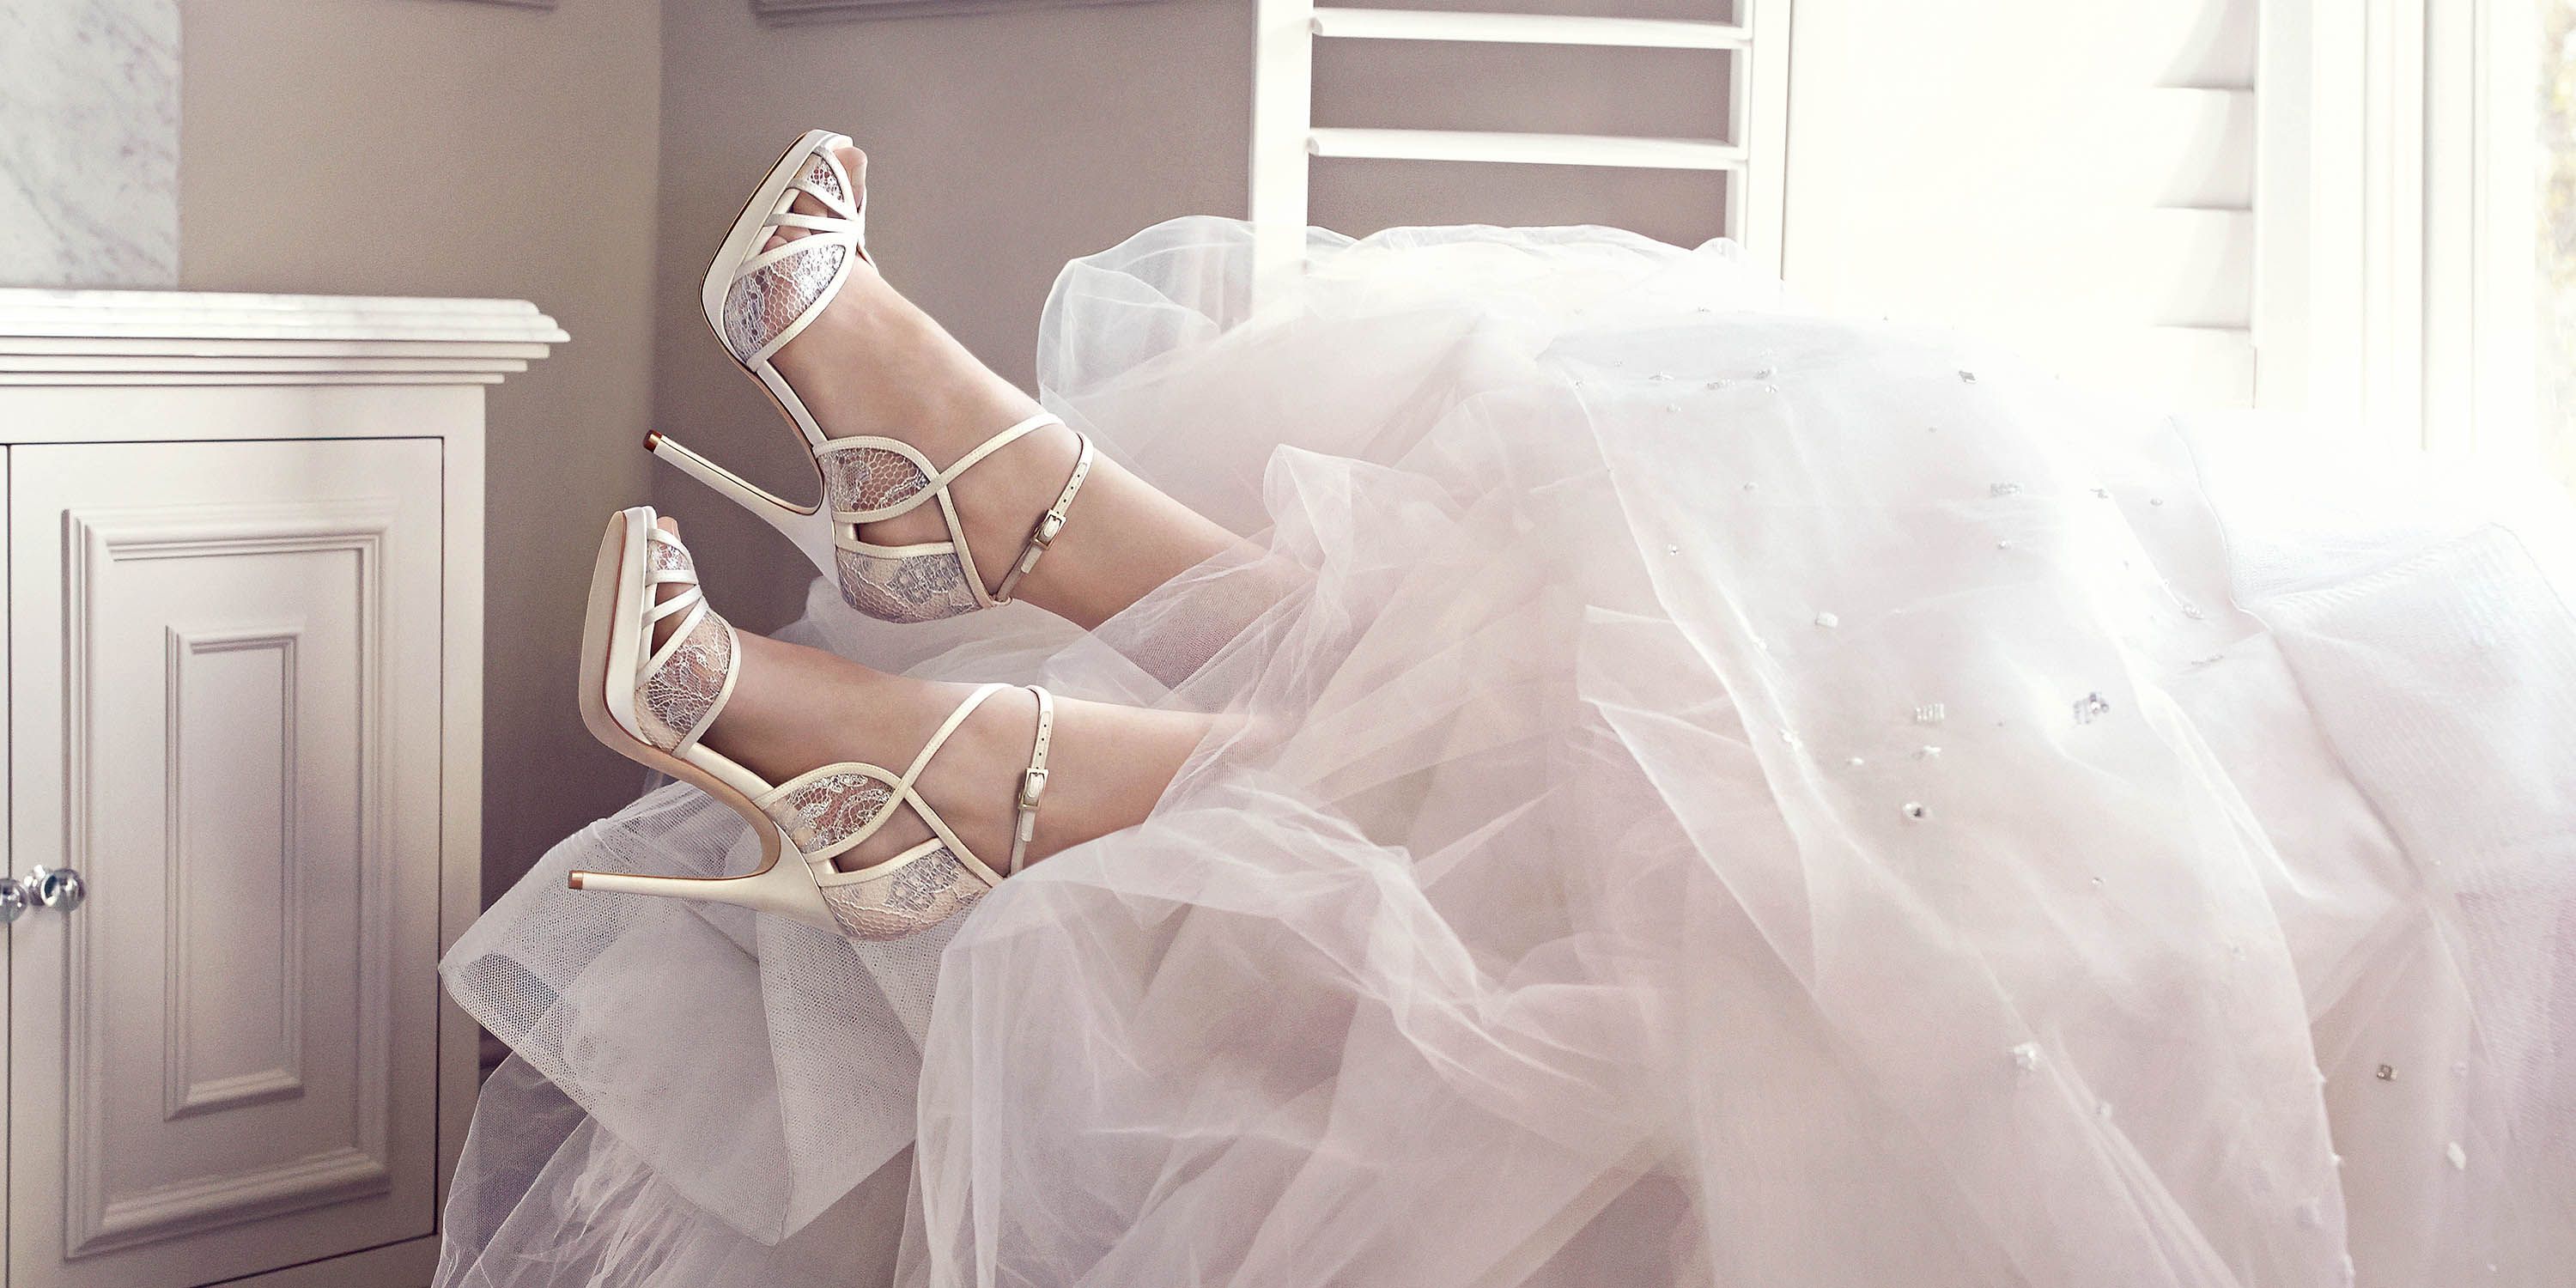 Introducing the new Jimmy Choo Bridal Collection 